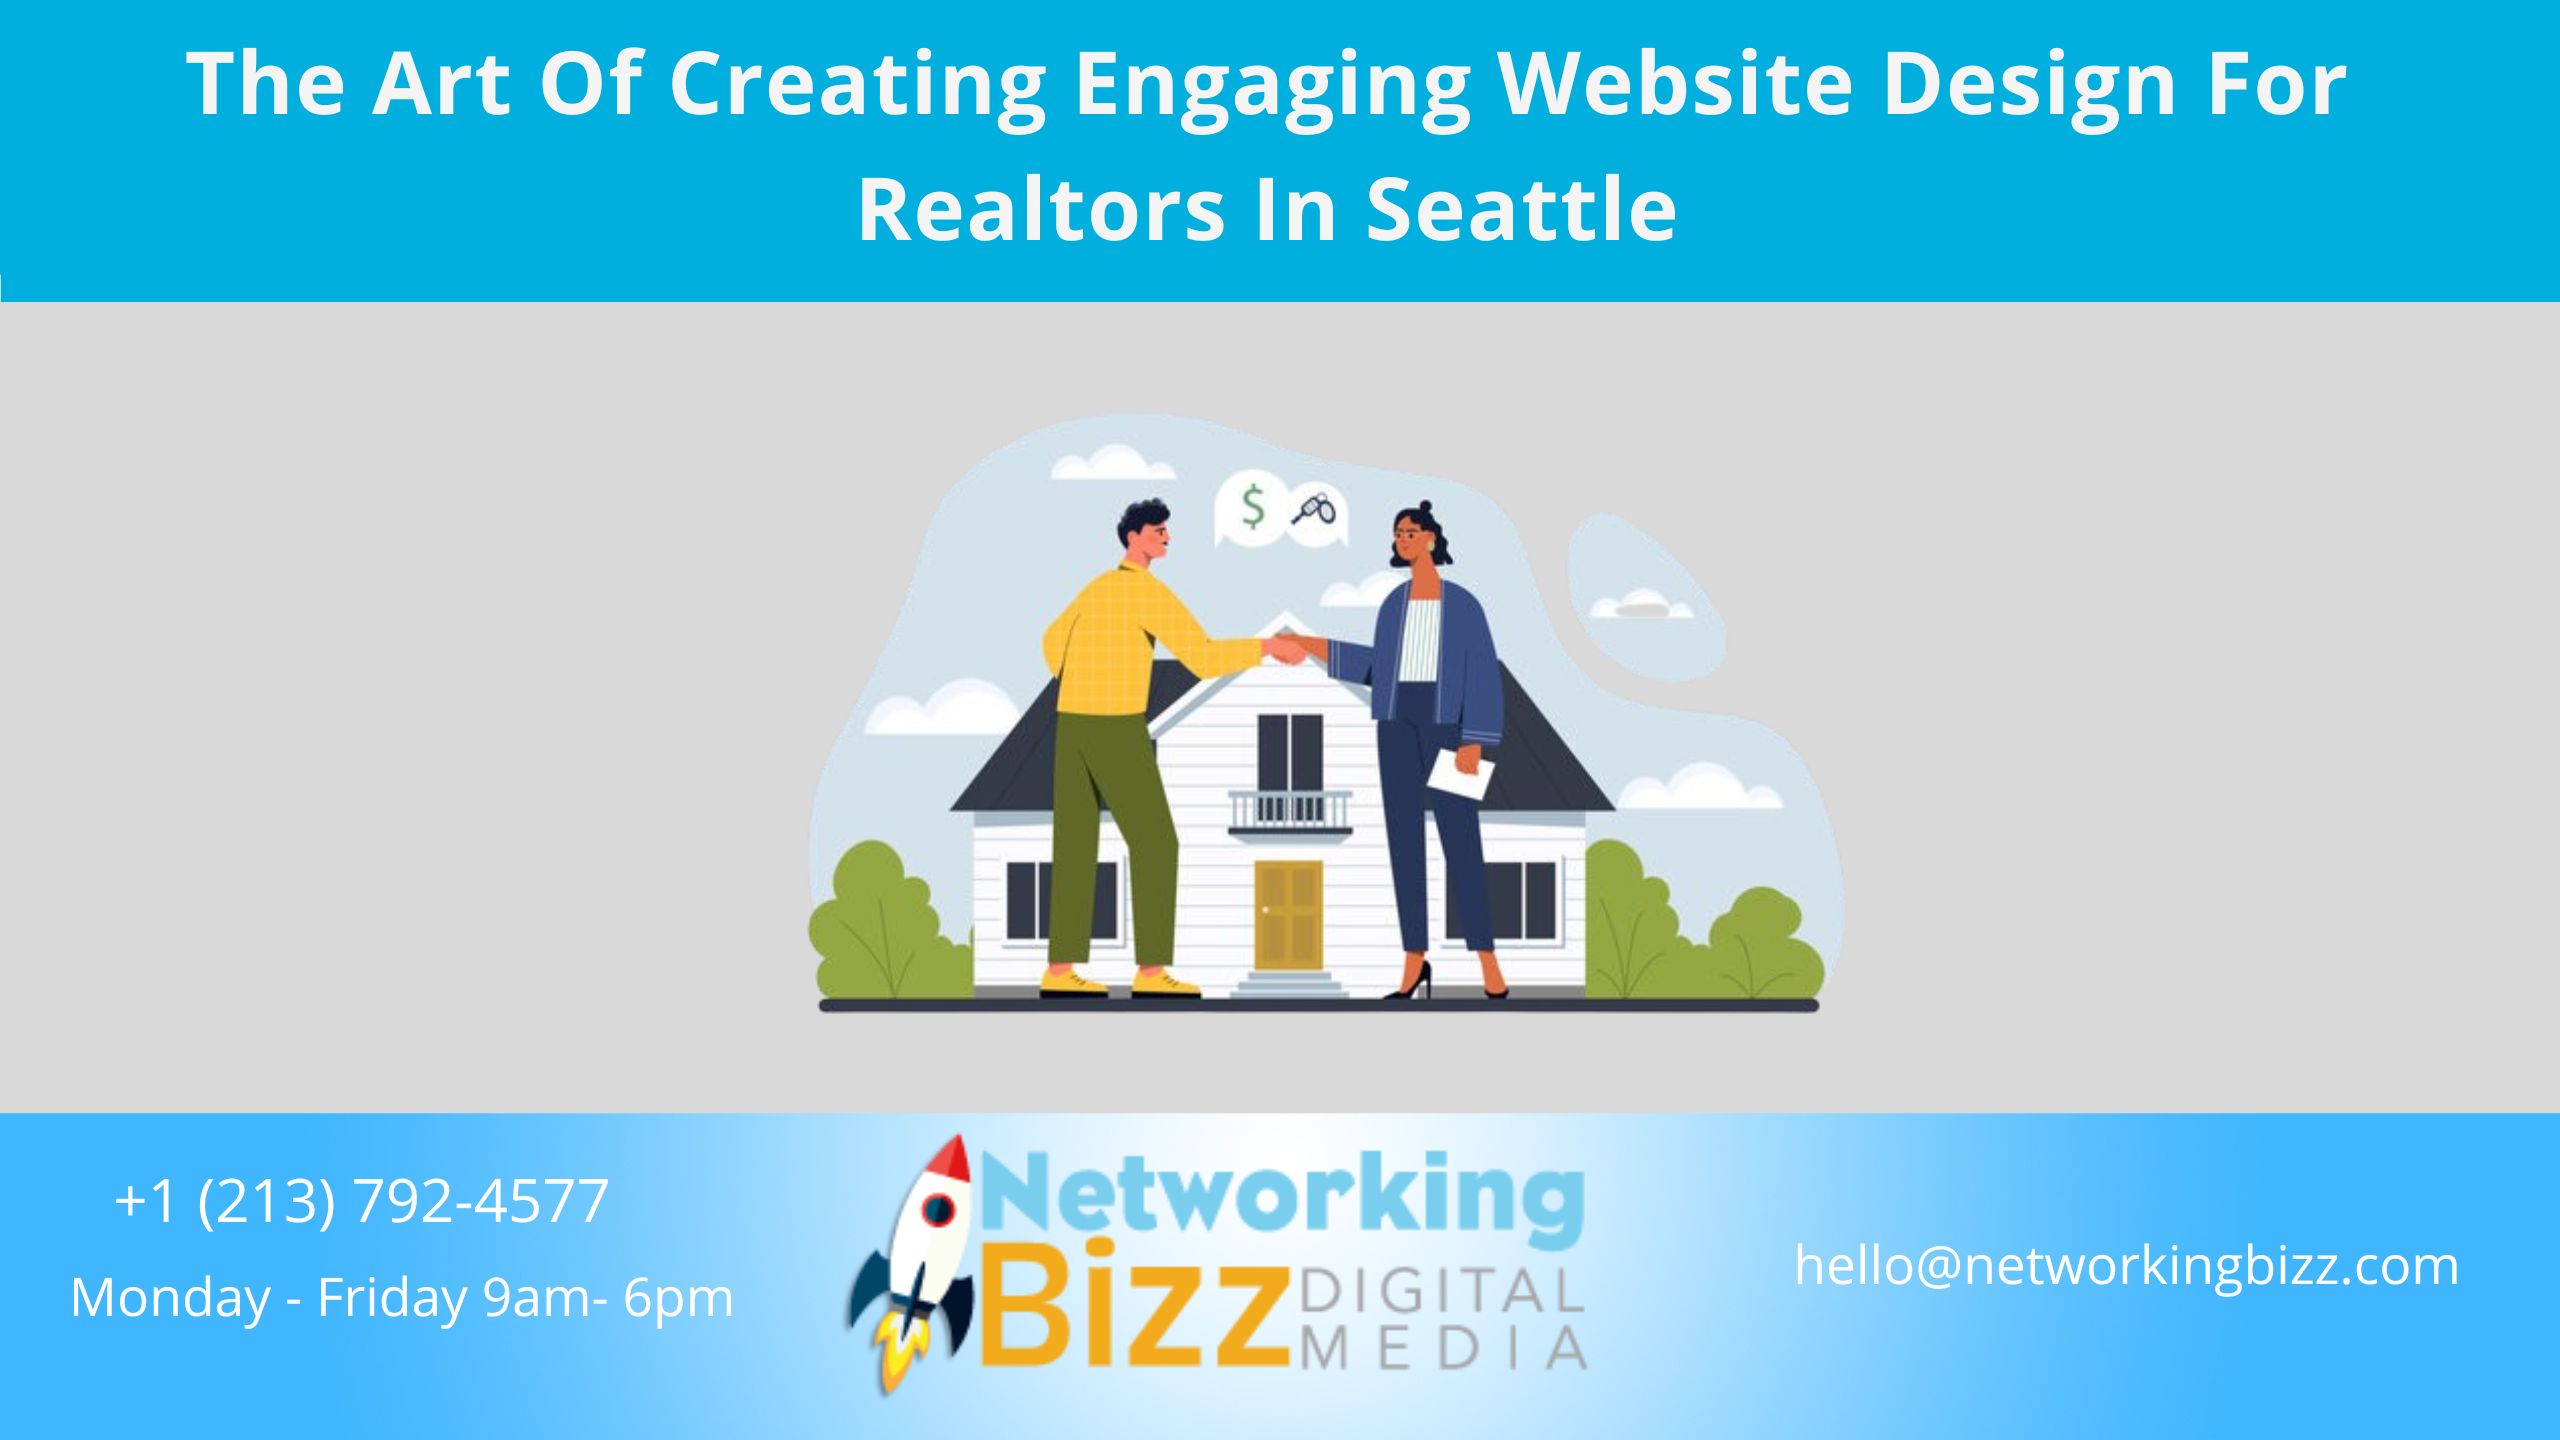 The Art Of Creating Engaging Website Design For Realtors In Seattle